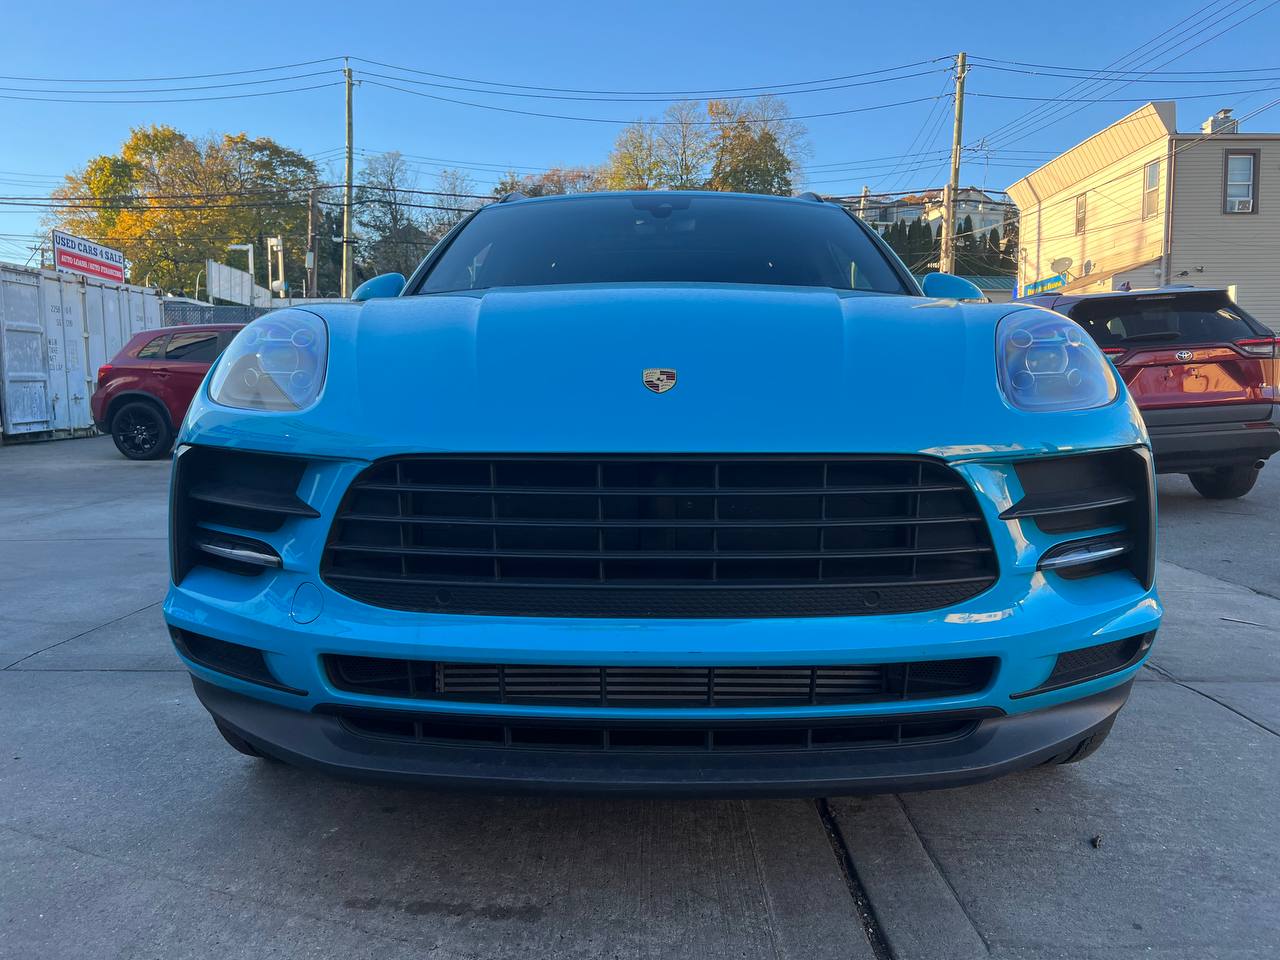 Used - Porsche Macan SUV for sale in Staten Island NY